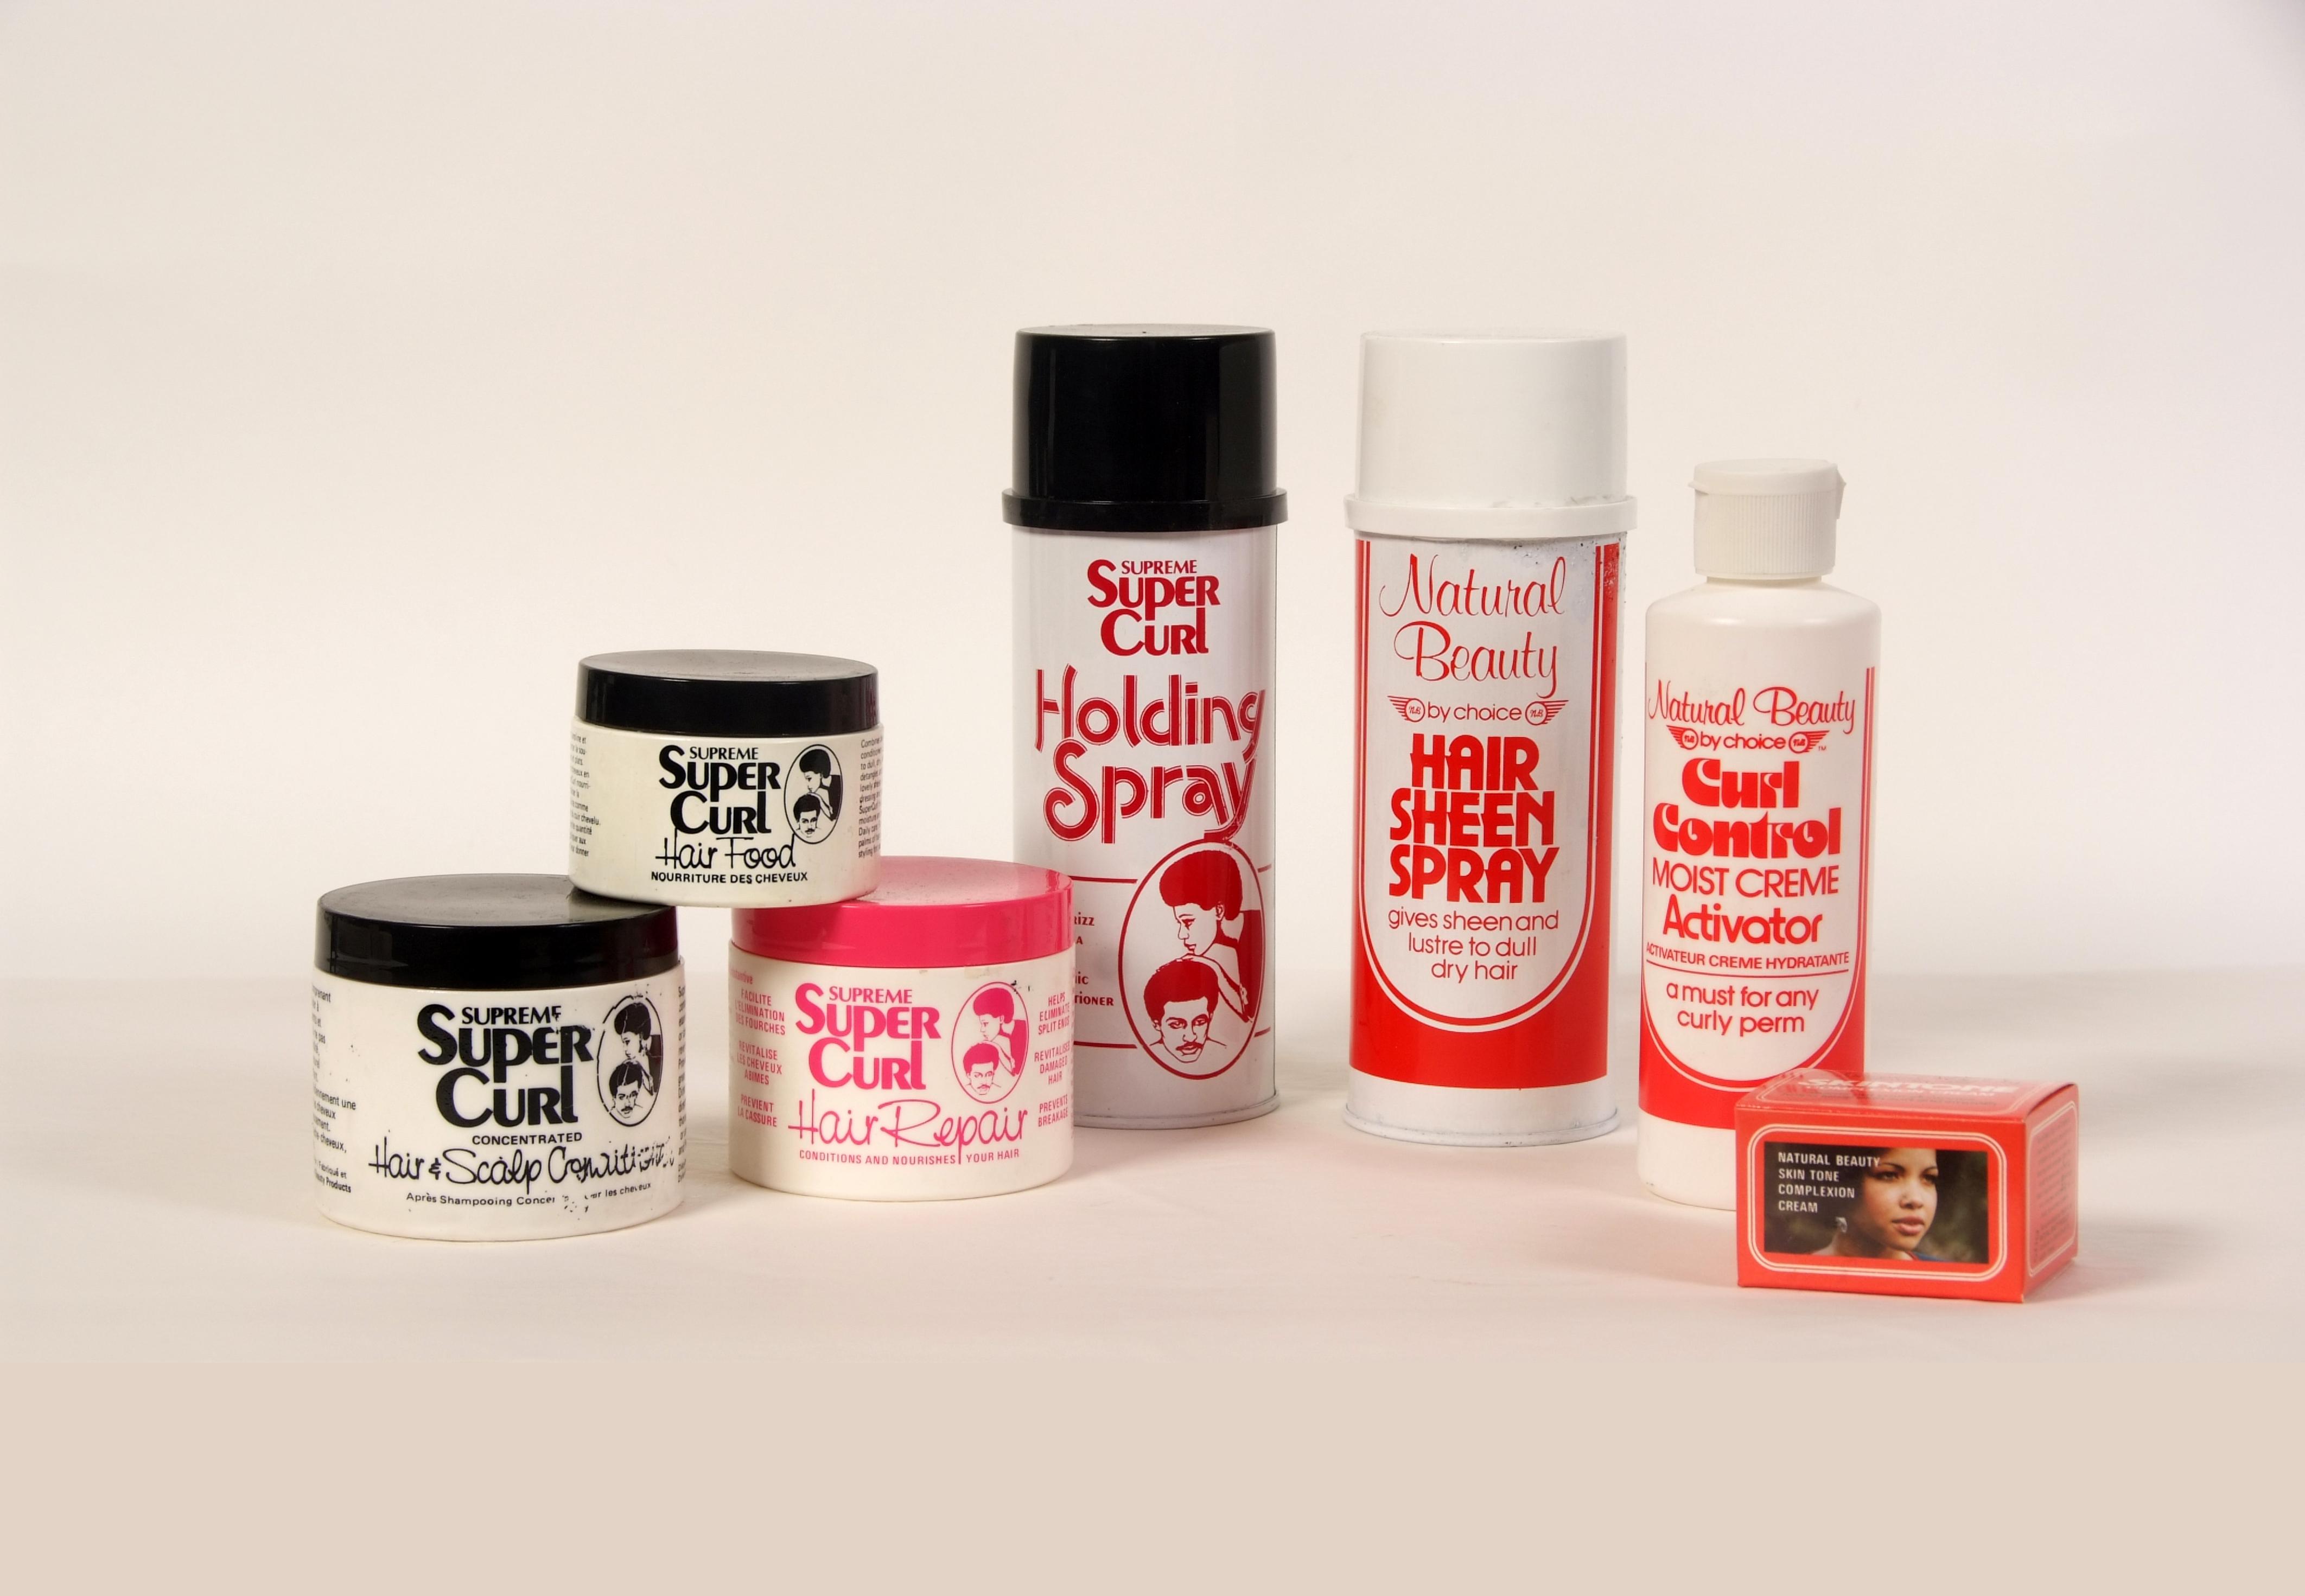 Hair and beauty products made by Dyke and Dryden